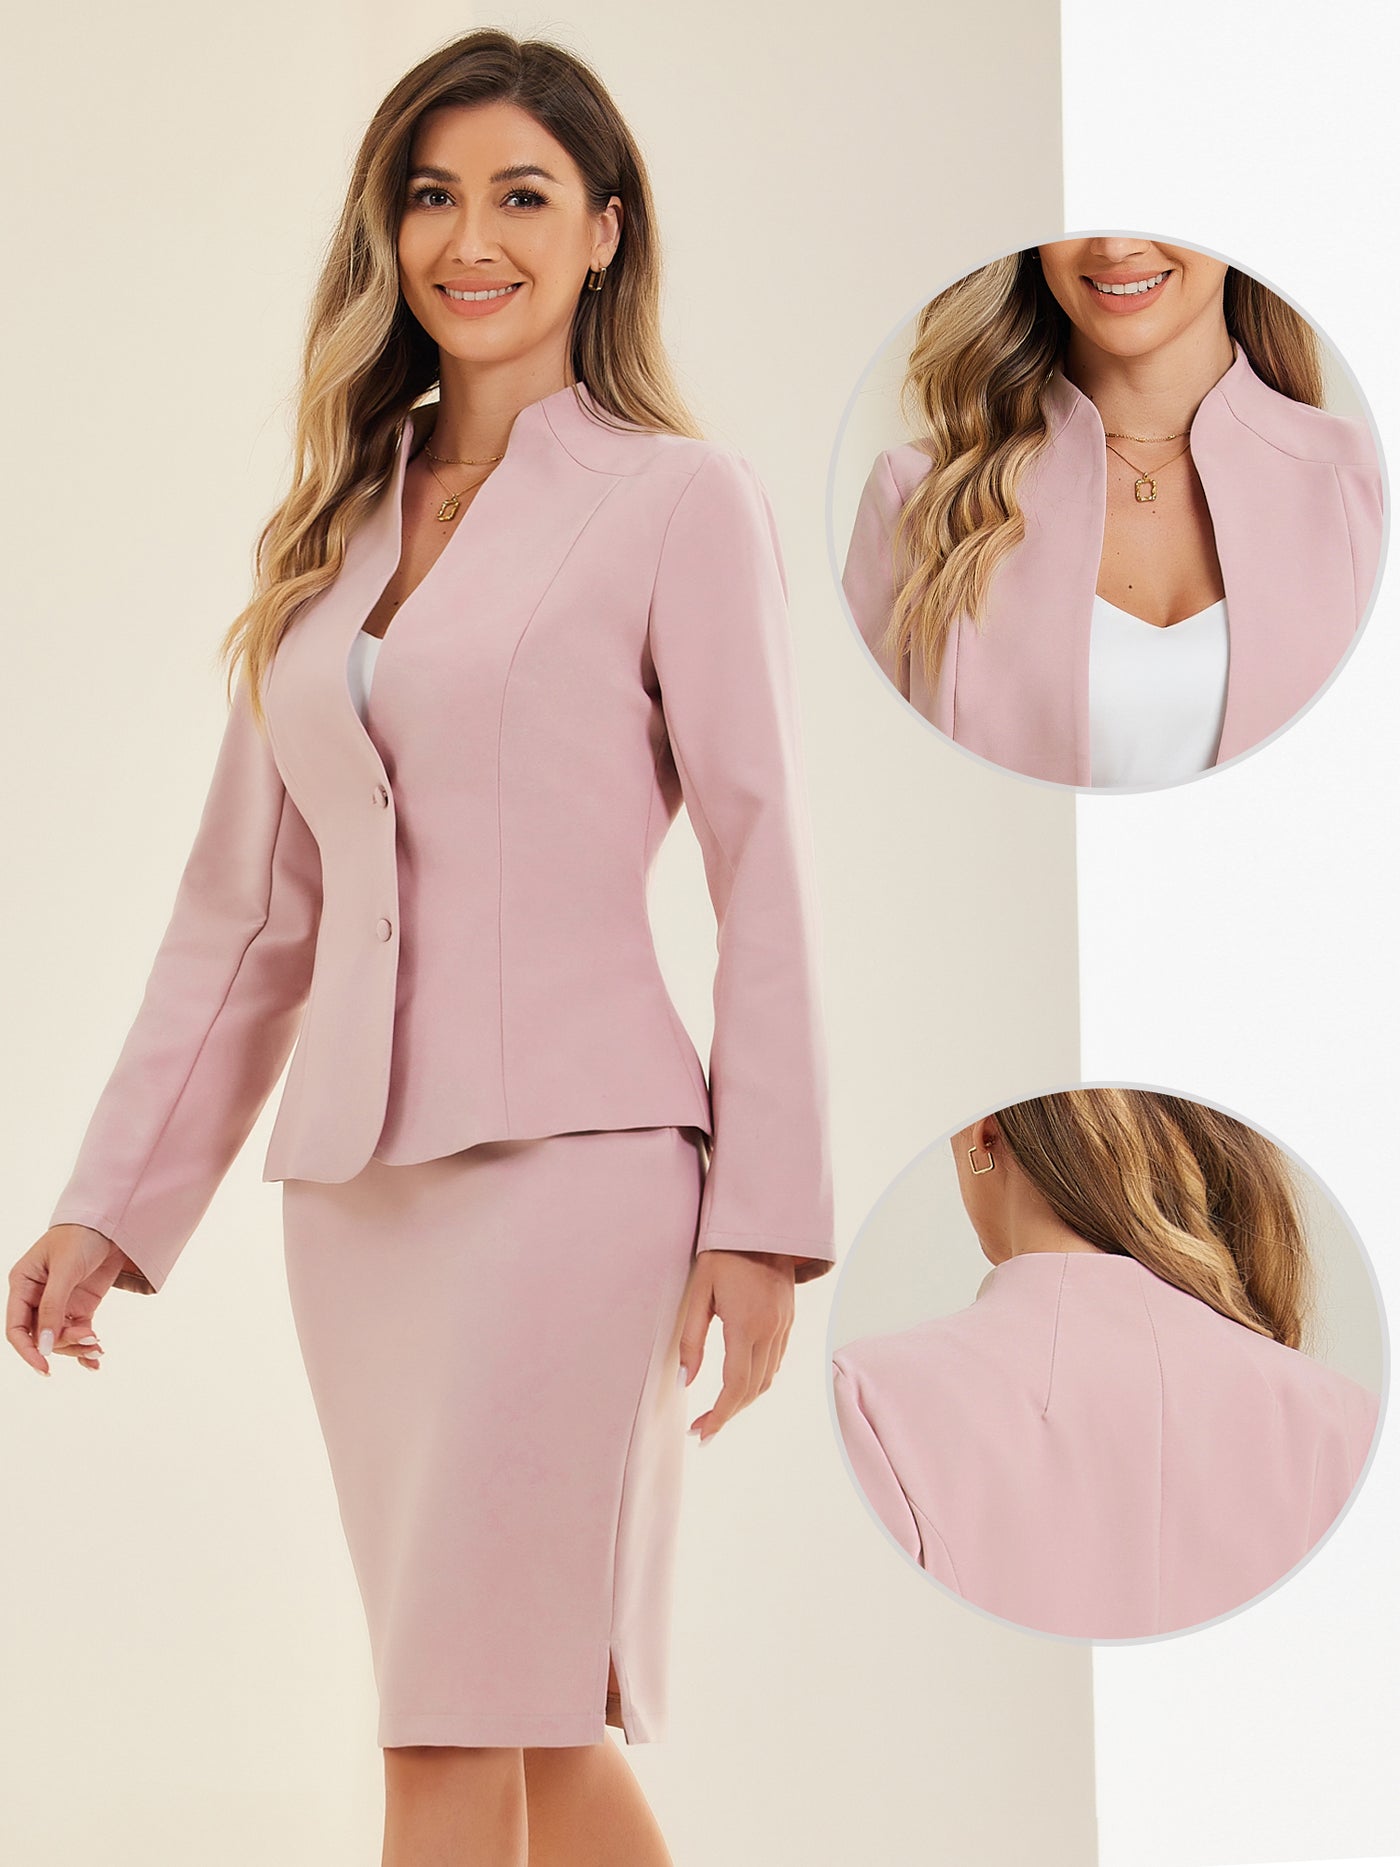 Allegra K 2pc Business Collarless Blazer and Formal Pencil Skirt Suit Sets